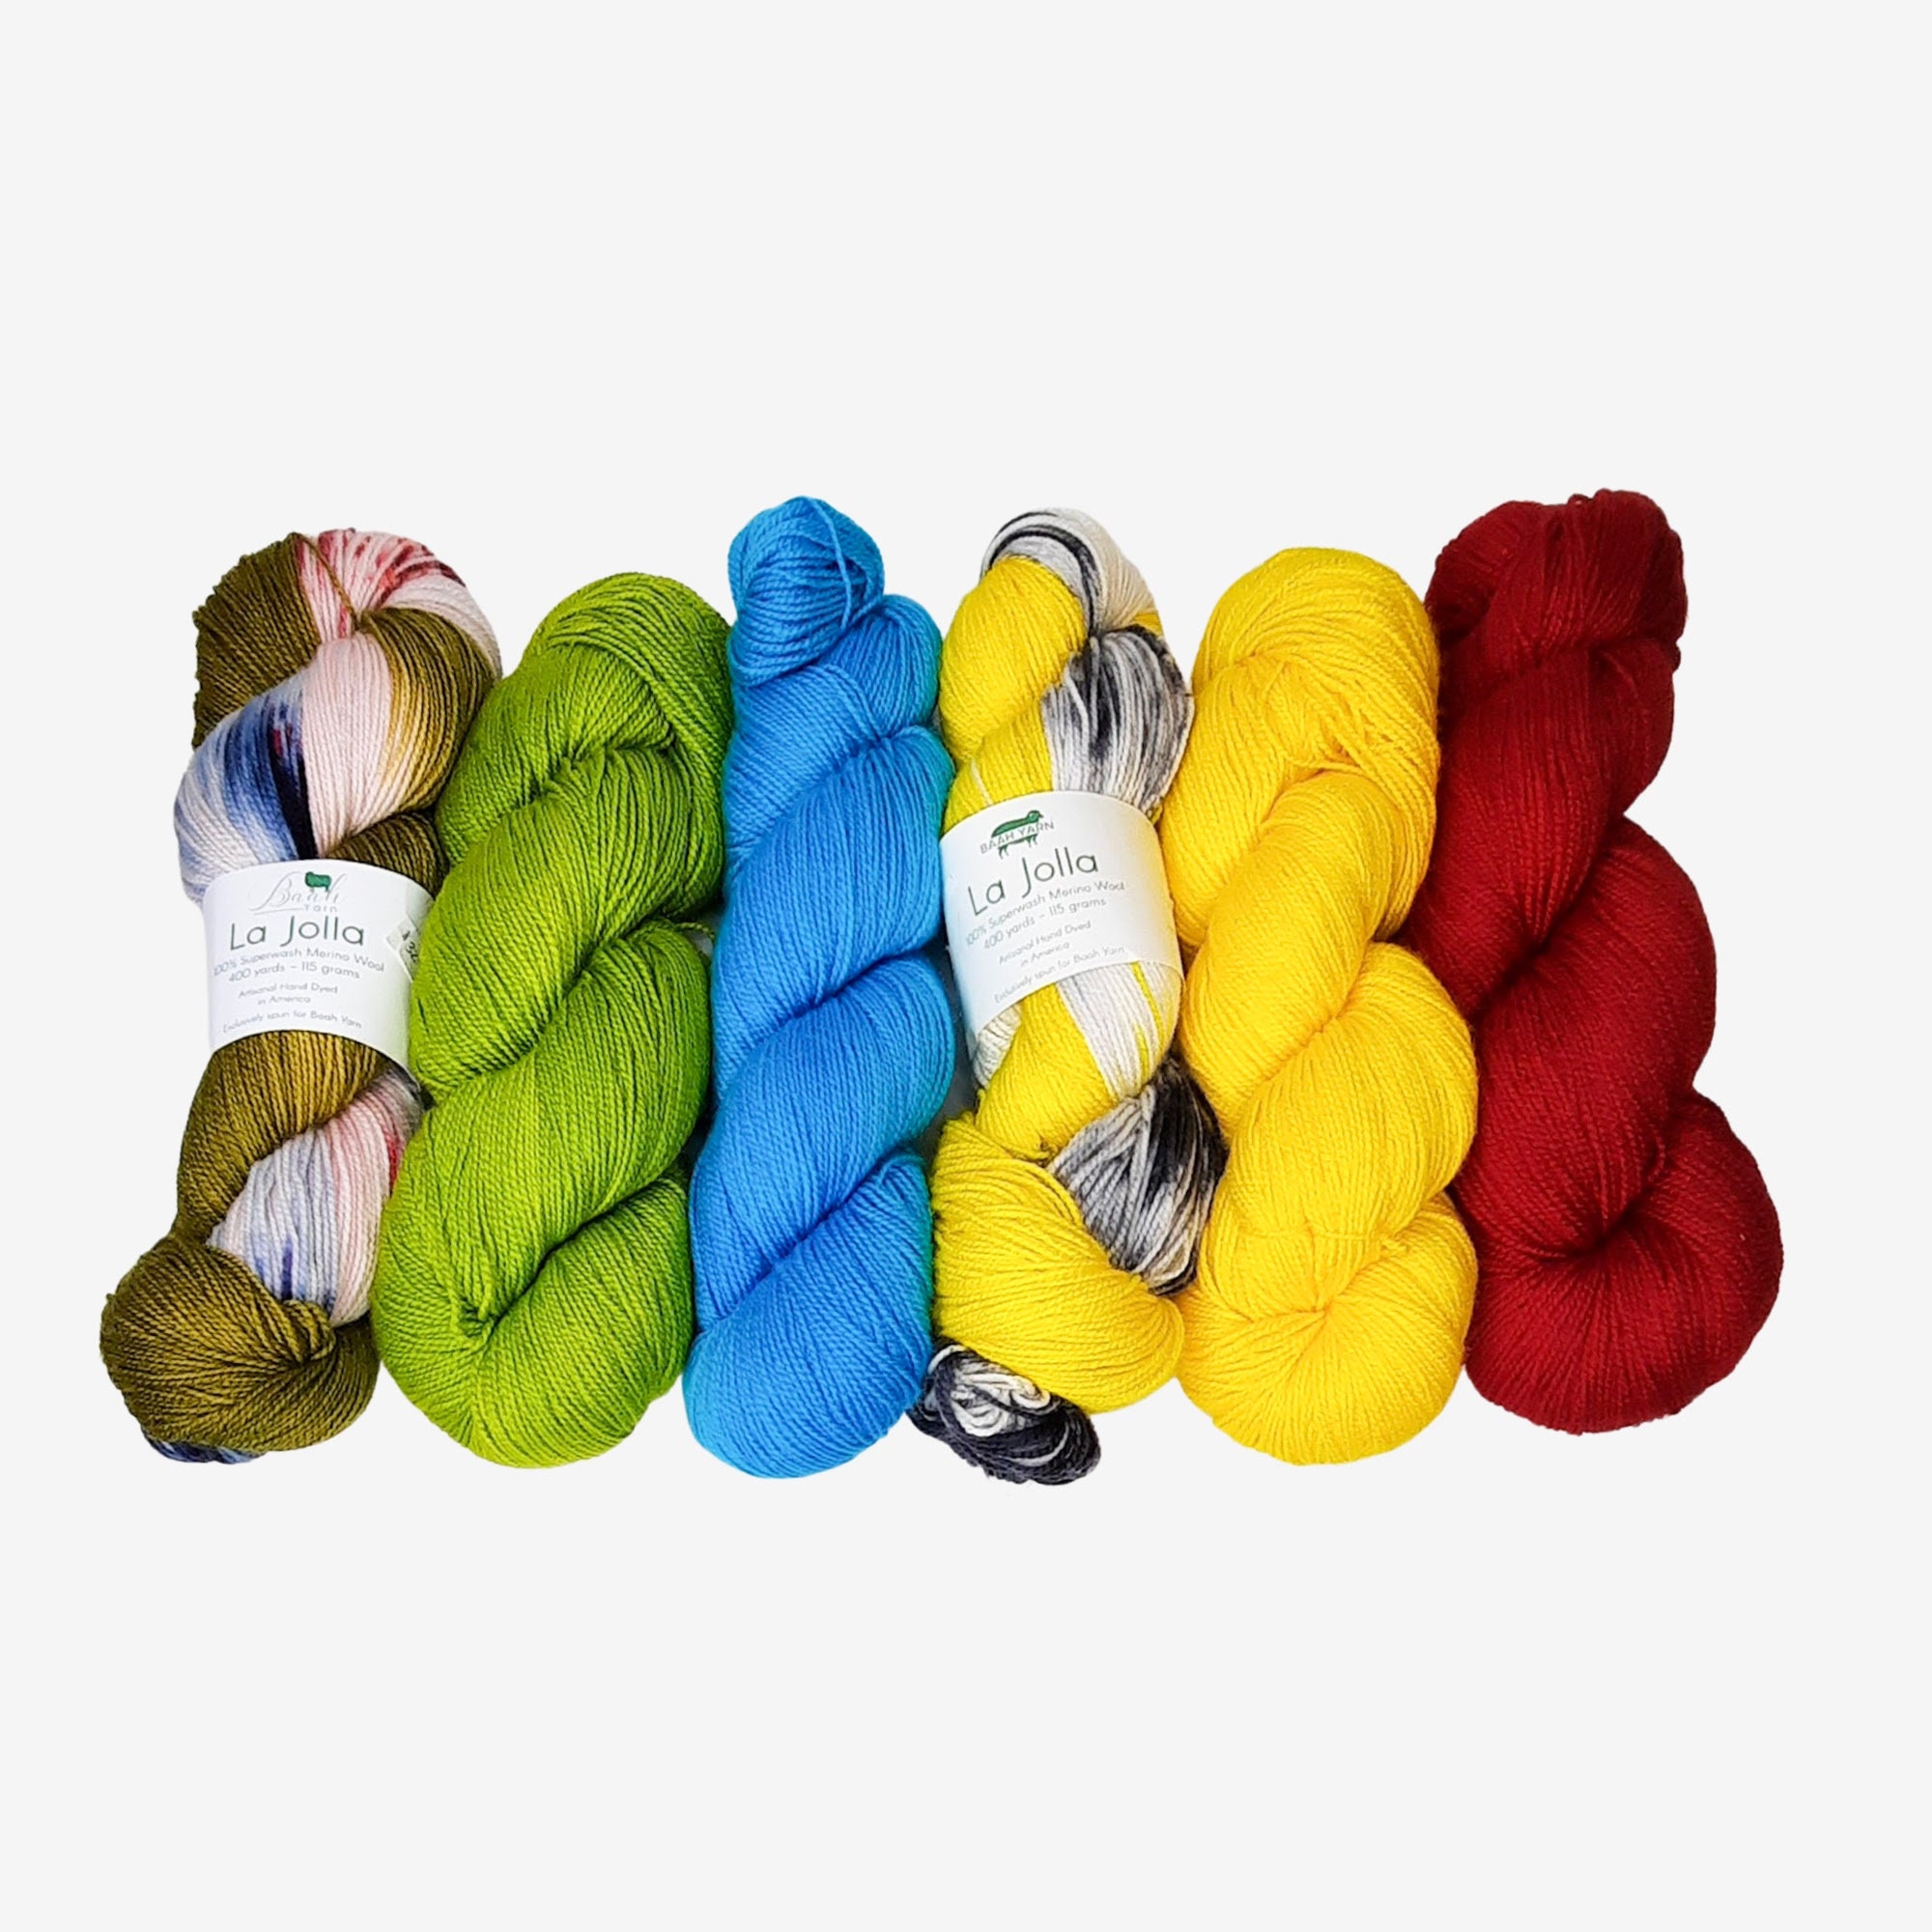 Soft Classic Multi Ombre Yarn by Loops & Threads - Multicolor Yarn for  Knitting, Crochet, Weaving, Arts & Crafts - Bo Peep, Bulk 12 Pack 